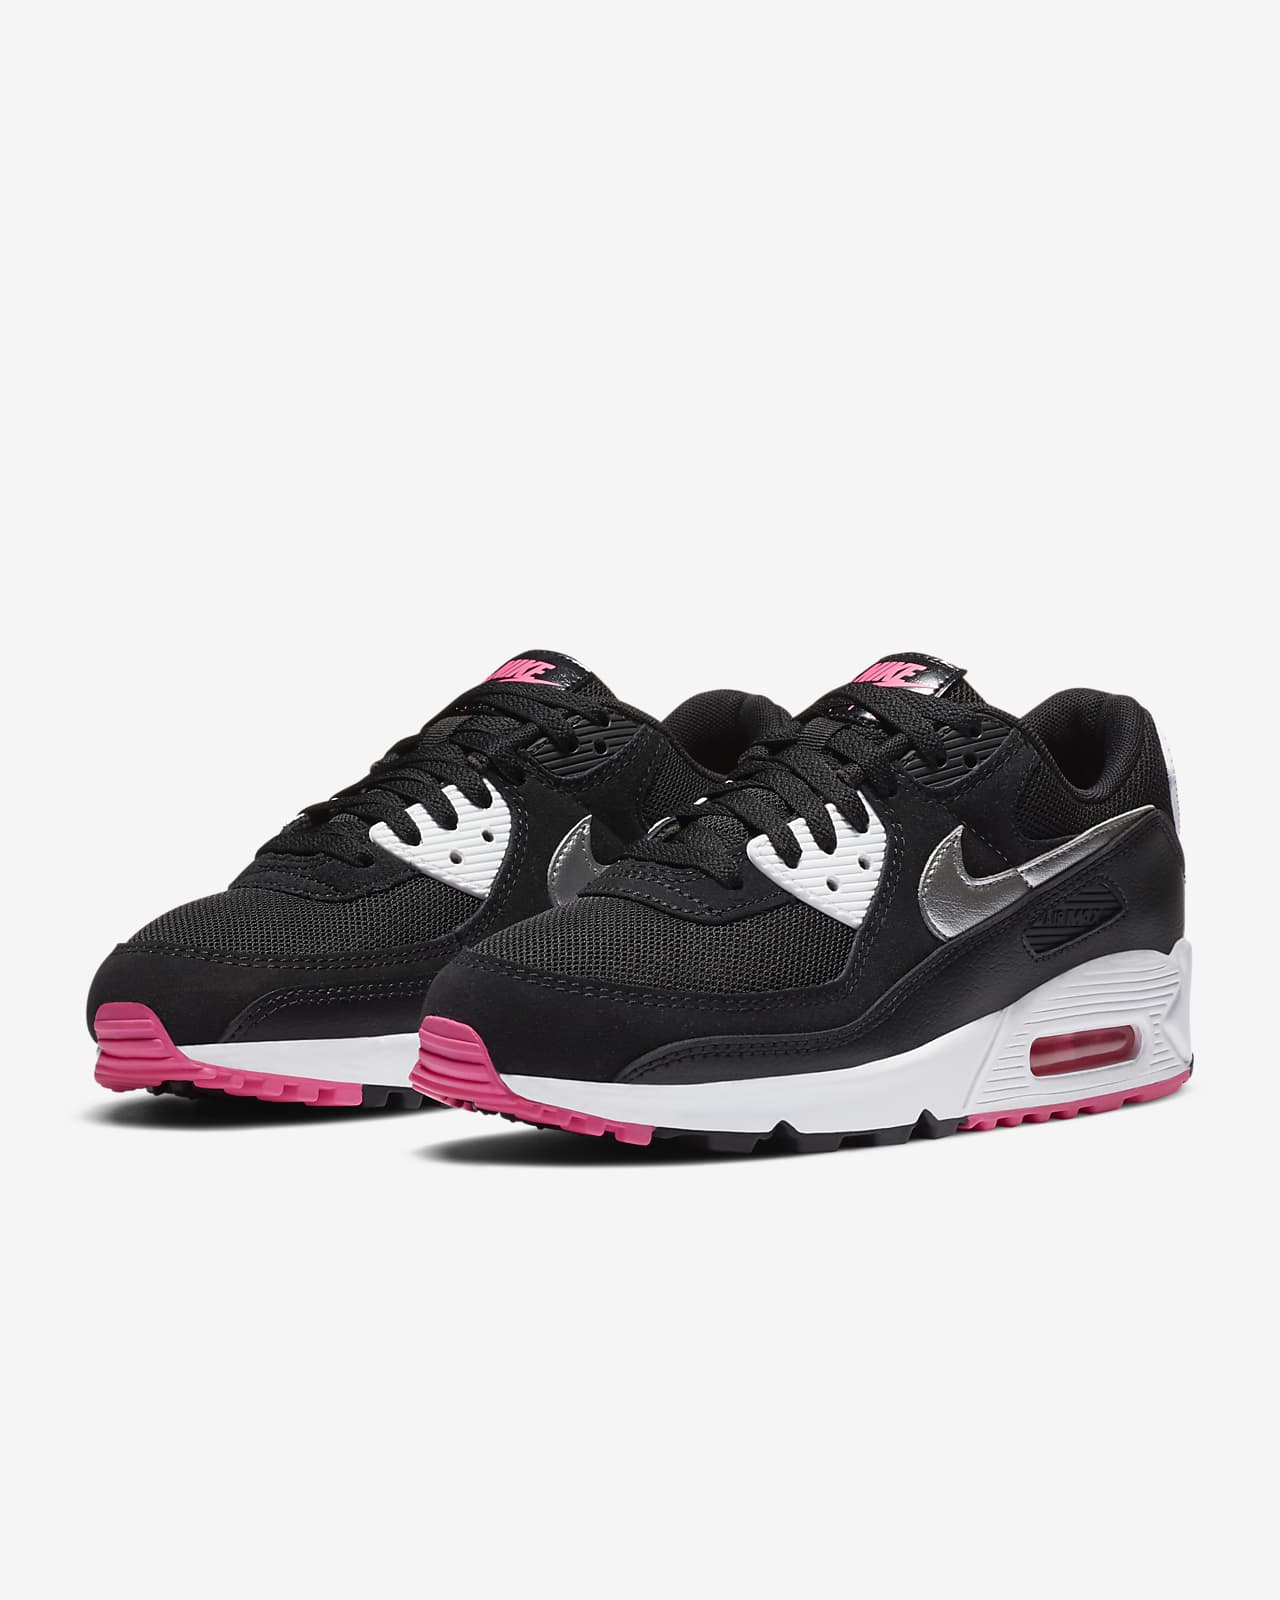 nike air max 90s black and white